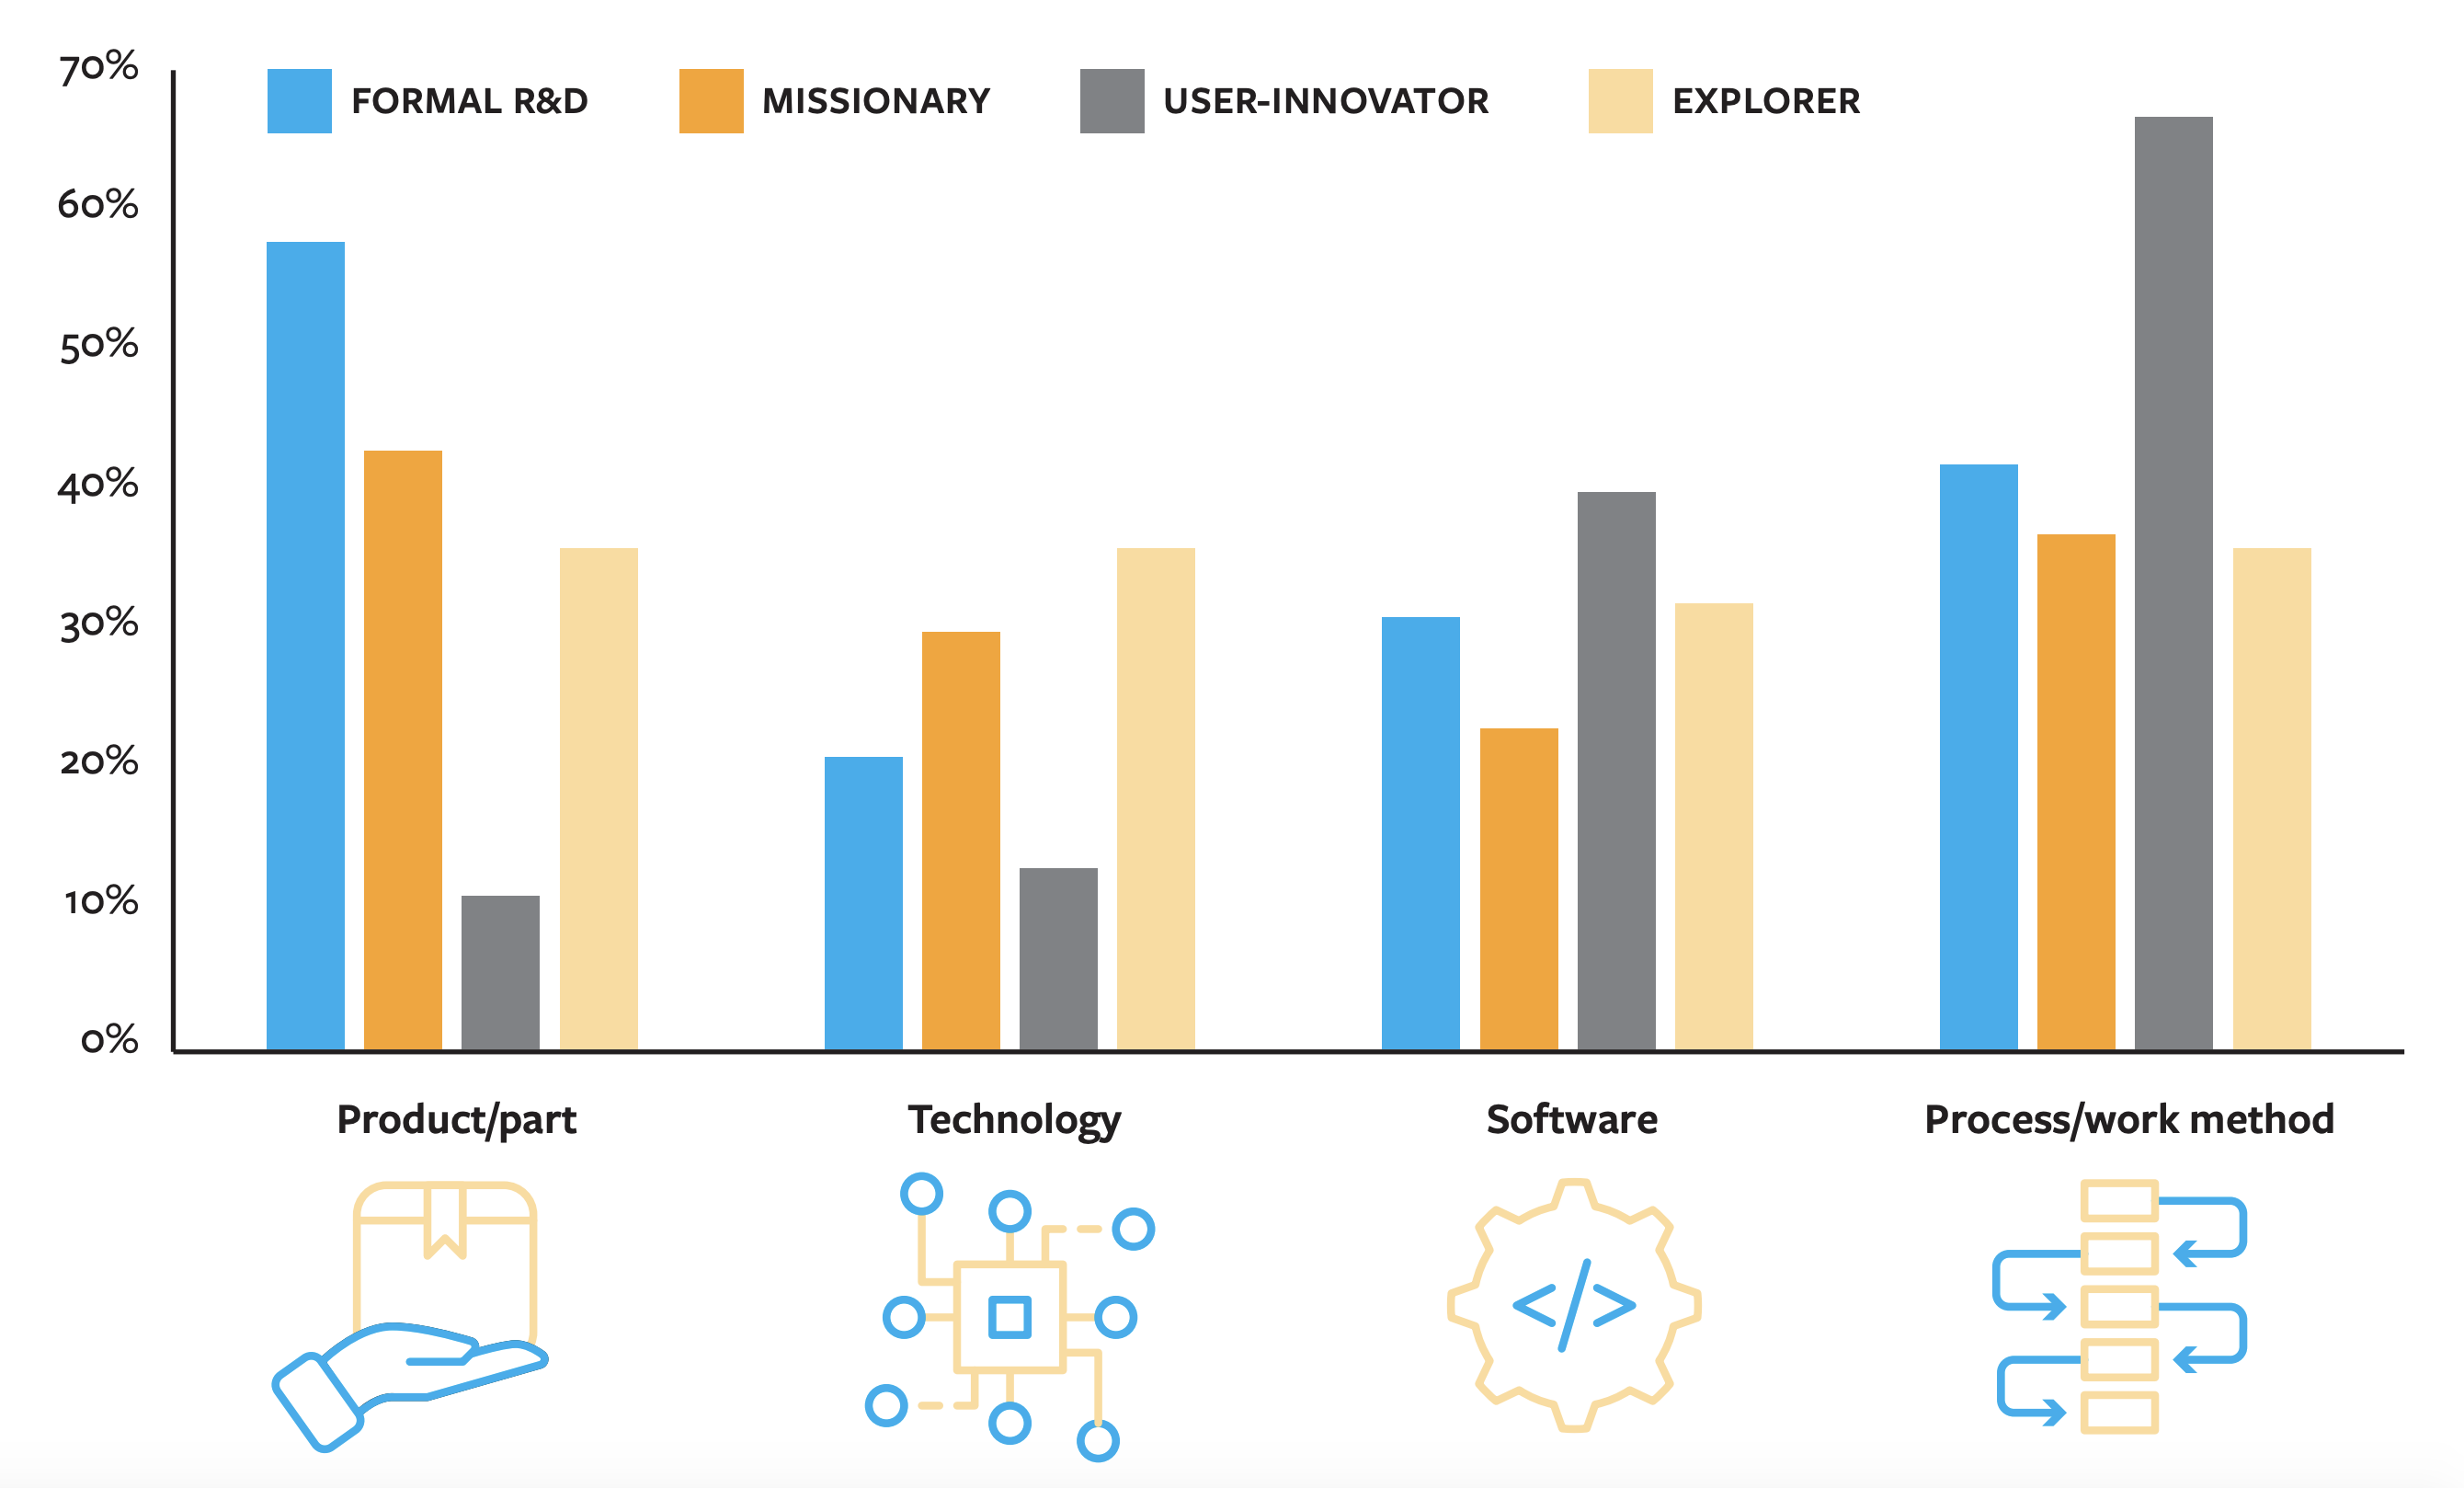 How Different Types of Innovators Target Their Efforts